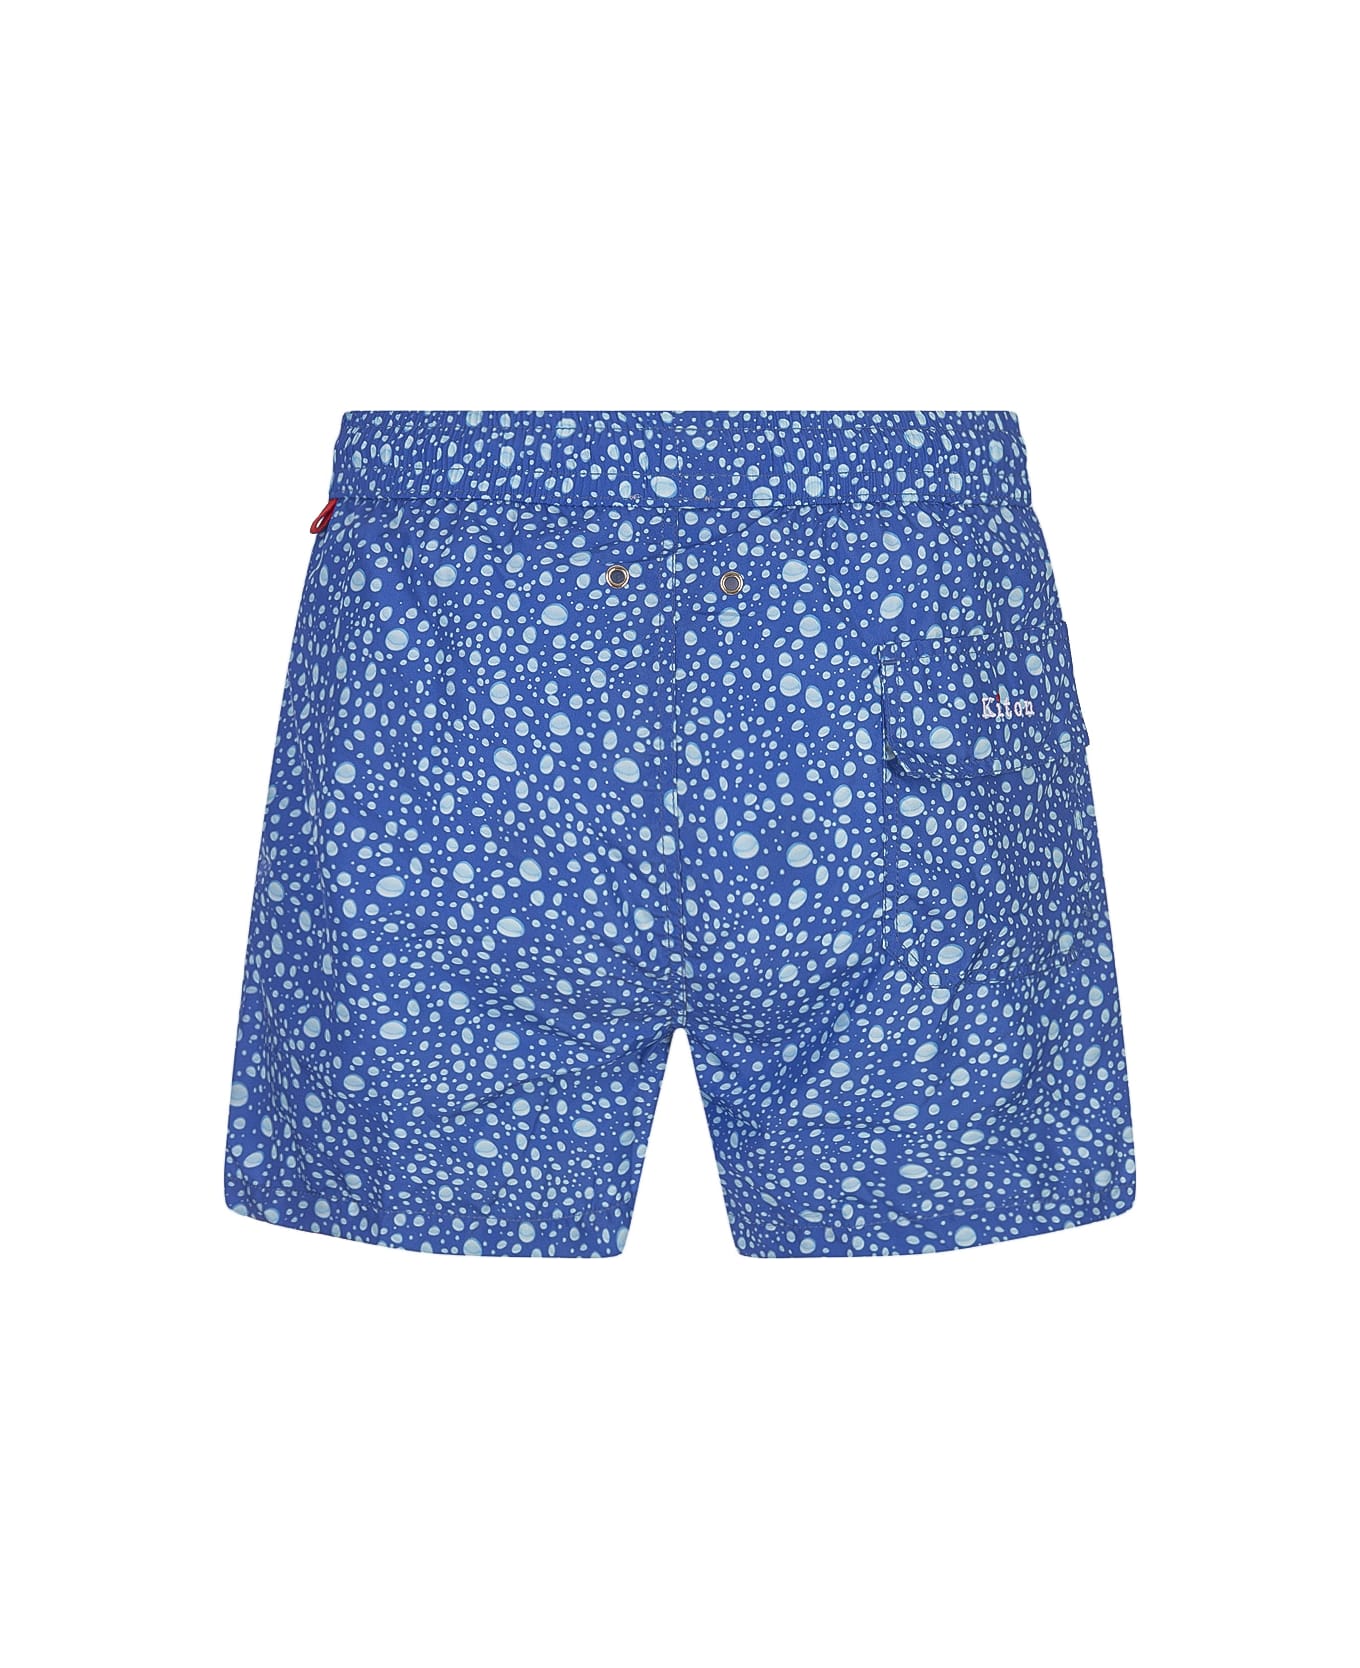 Kiton Blue Swim Shorts With Water Drops Pattern - Clear Blue